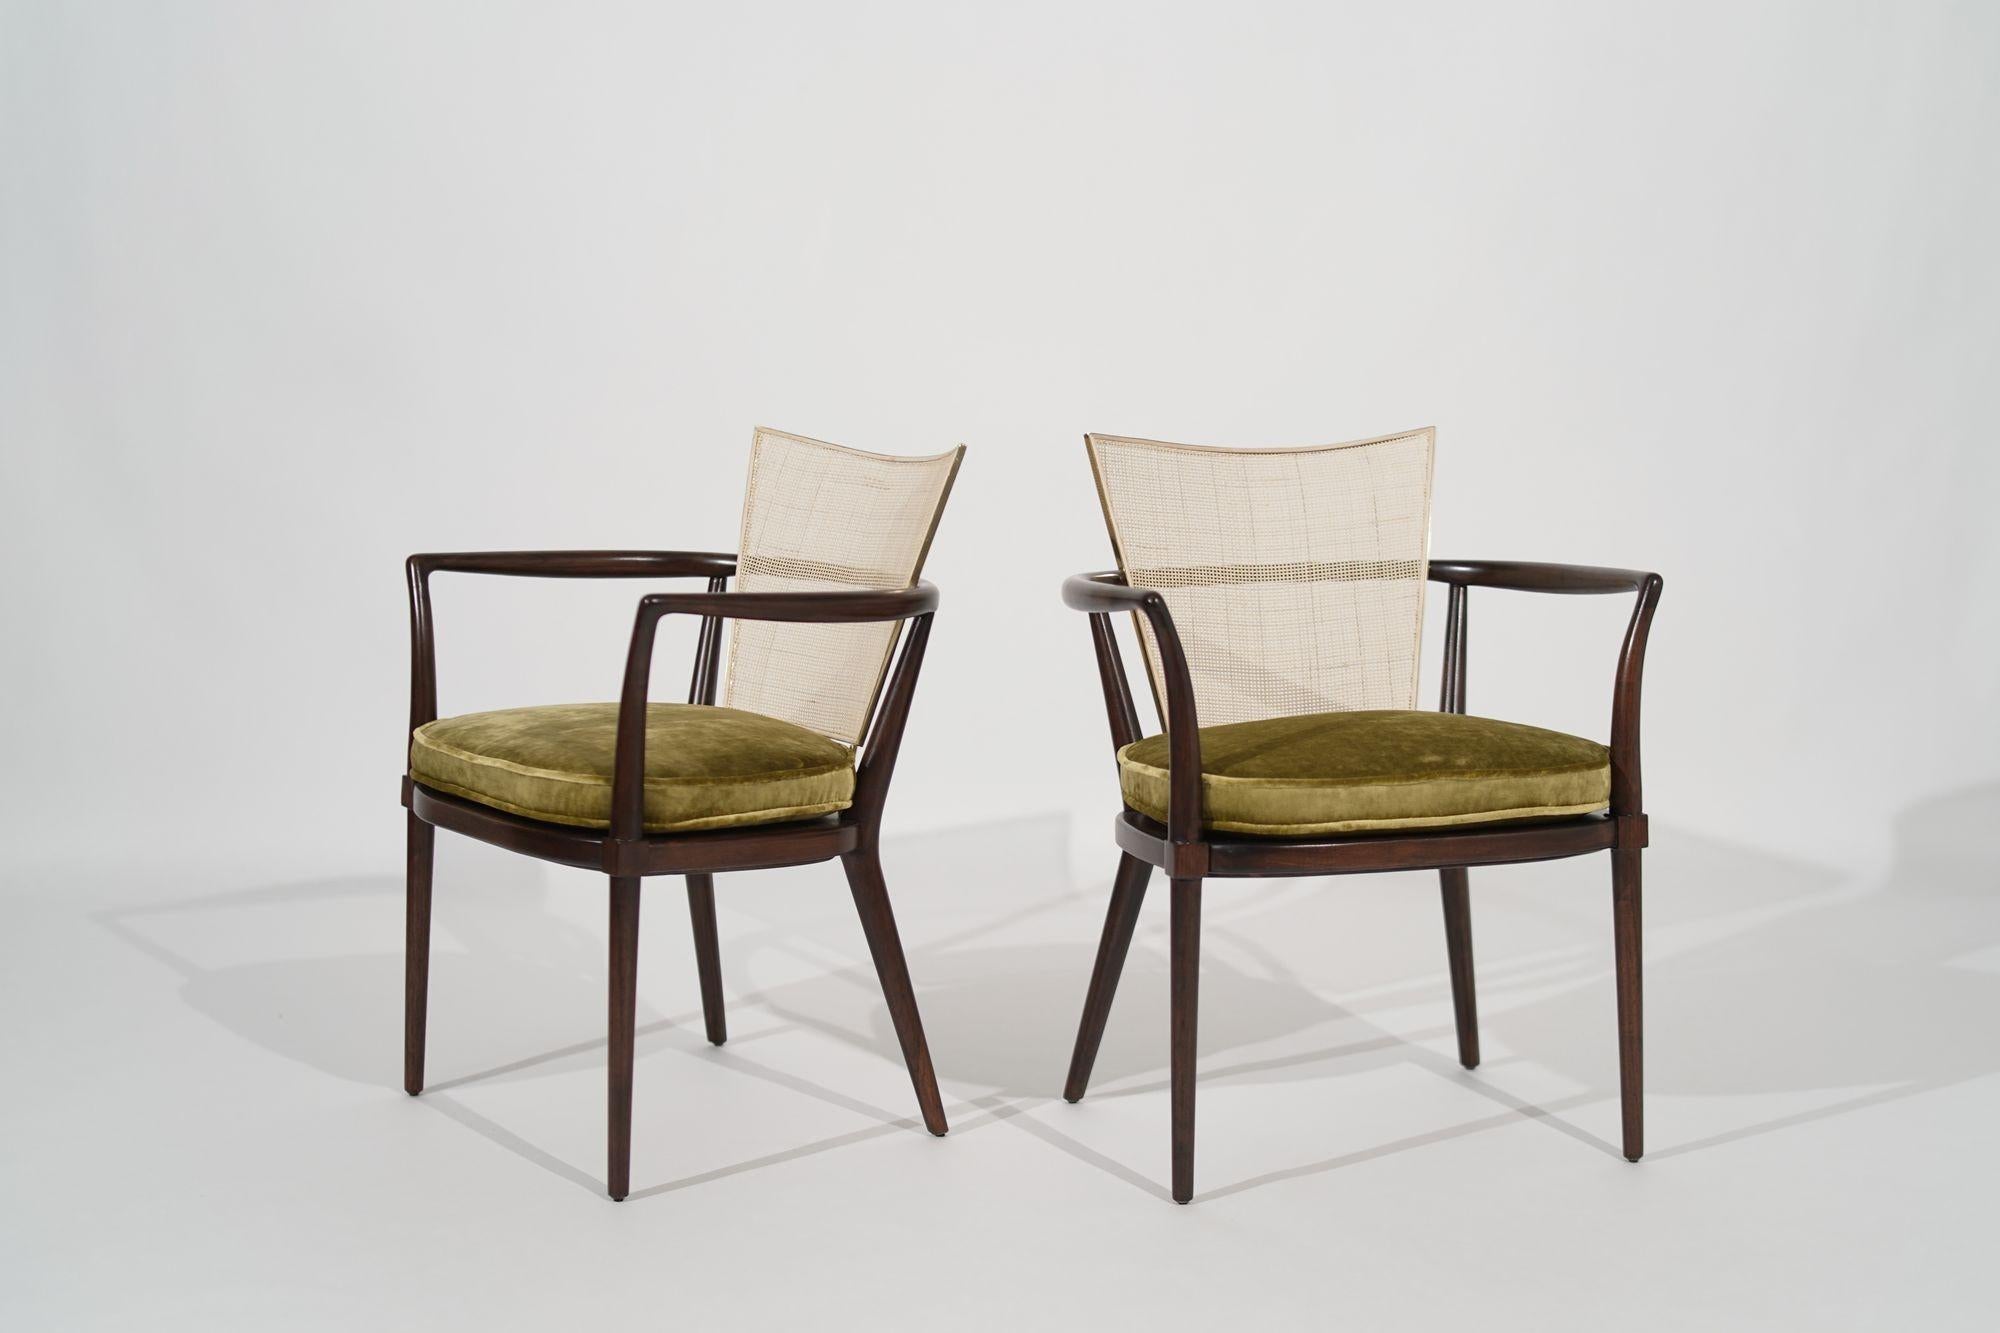 1950s Chairs by Bert England, meticulously revived by Stamford Modern to embody the iconic mid-century style. Crafted from rich walnut with caned backrests and brass accents, these chairs seamlessly blend vintage allure with contemporary